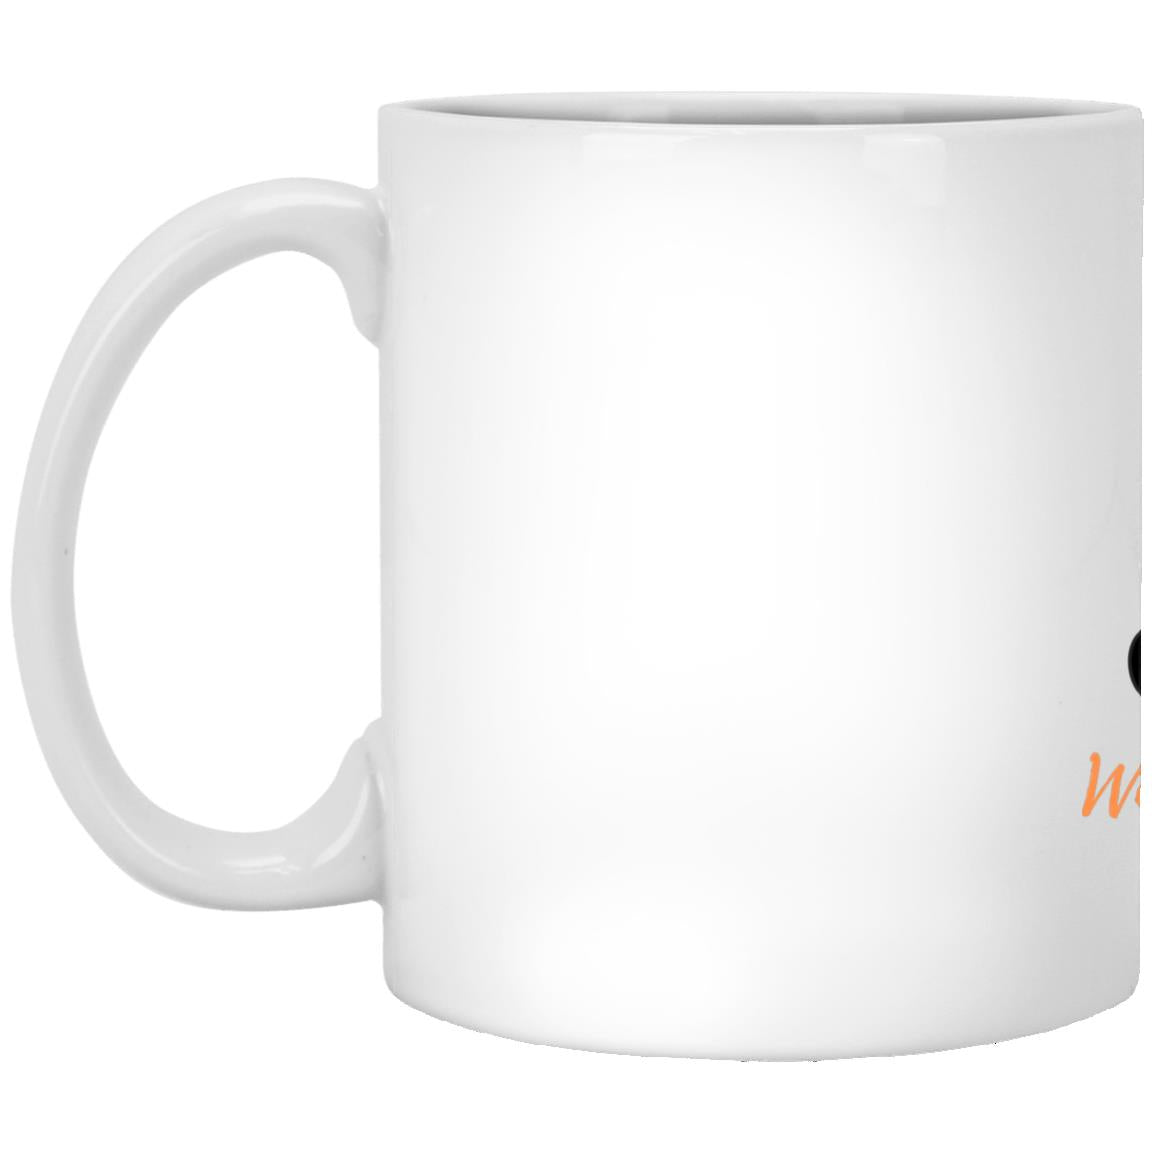 Lace up your boots, grab your broom! XP8434 11 oz. White Mug